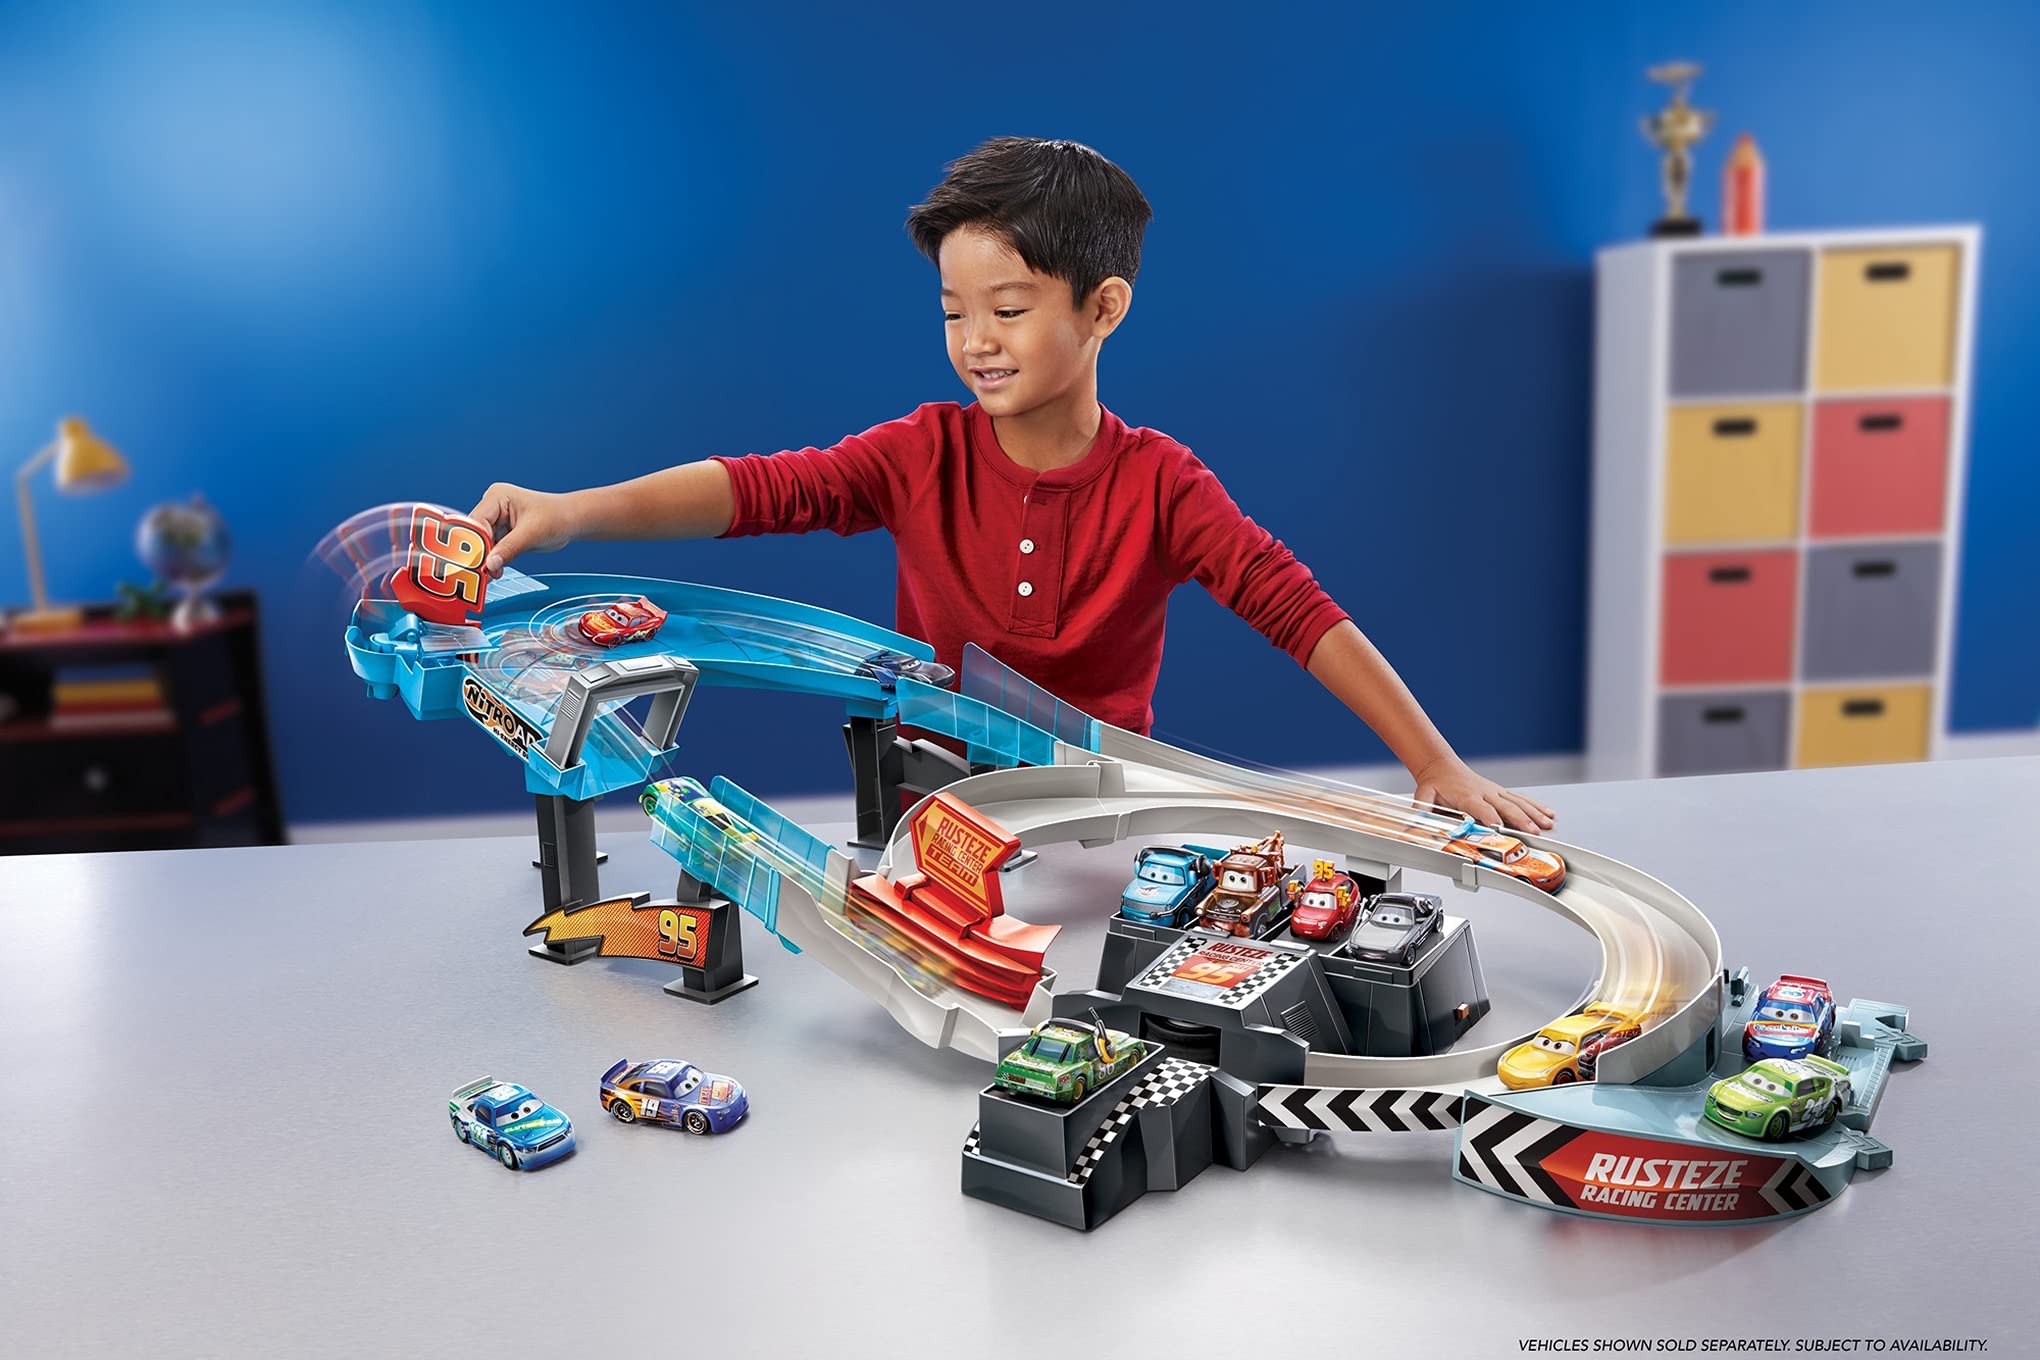 Disney Car Toys Rust-Eze Double Circuit Speedway Playset Test Track Set For Drift, Race and Crash Competitions, With Lightning McQueen Vehicle, Kids Birthday Gift For Ages 4 Years and Older